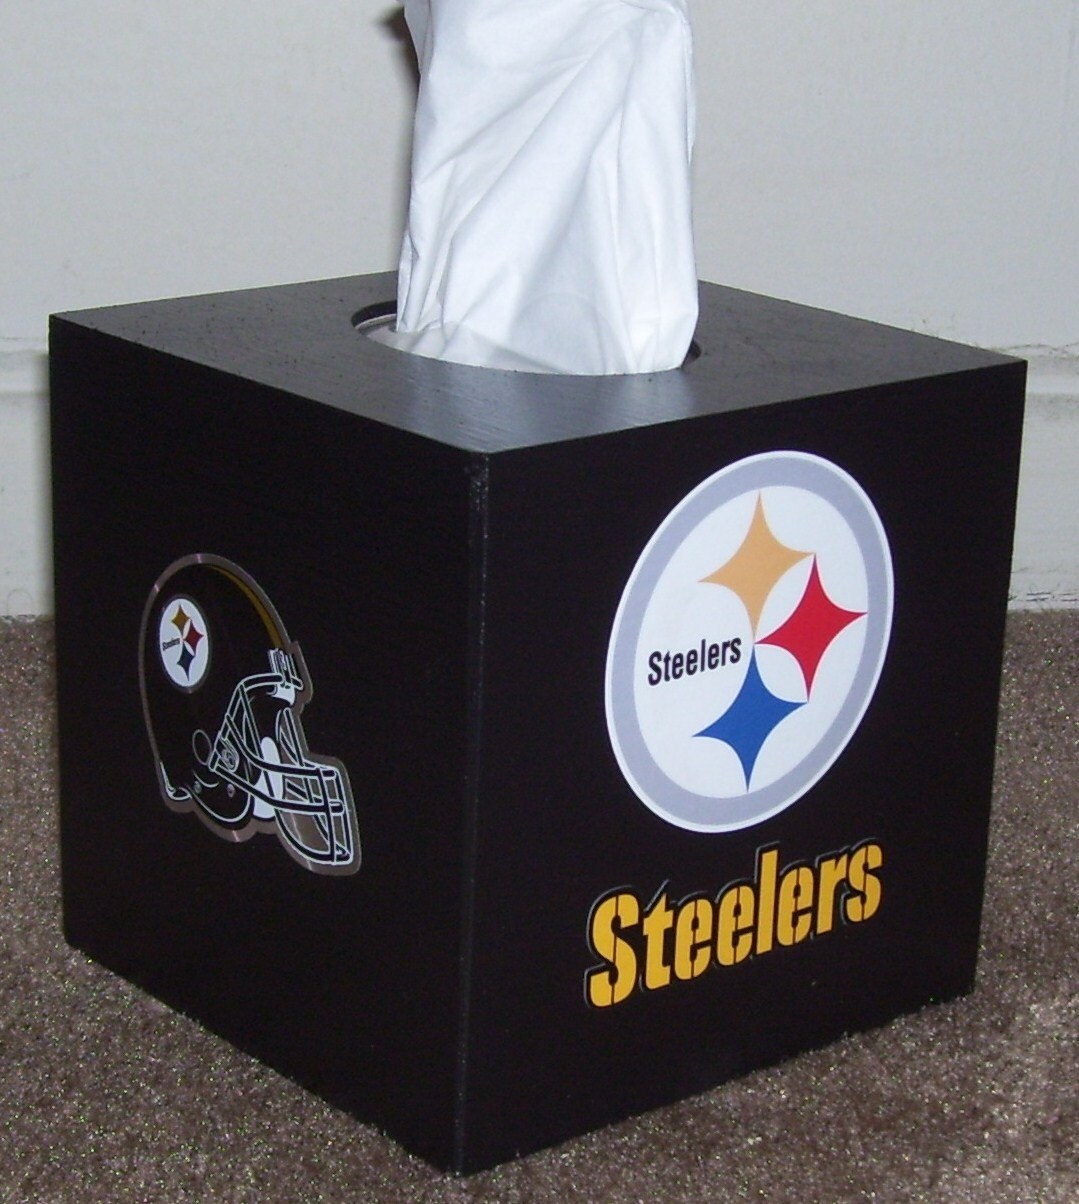 Image result for steelers fan crying